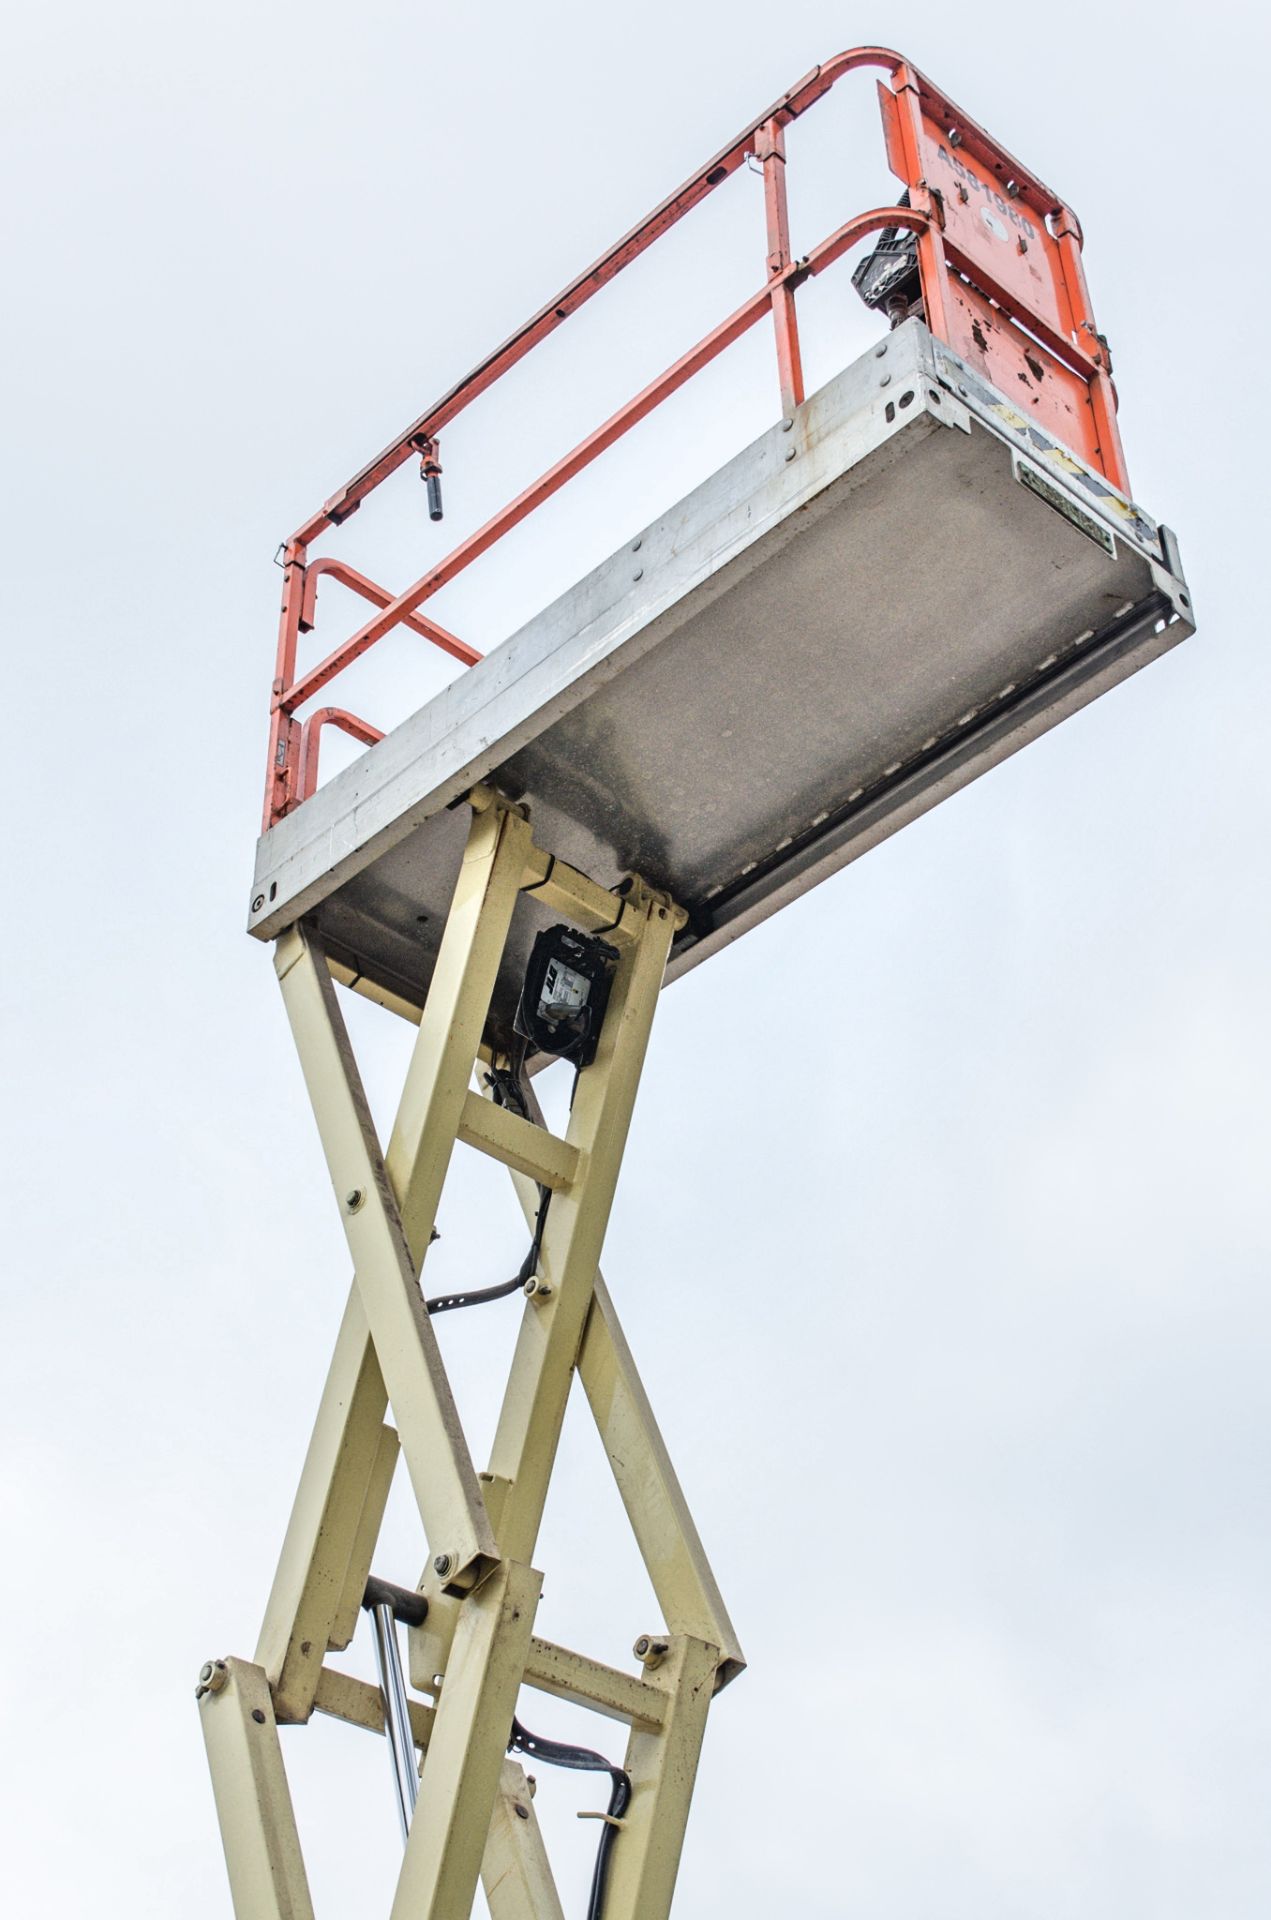 JLG 1930ES battery electric scissor lift access platform Year: 2012 S/N: 4495 Recorded Hours: 213 - Image 6 of 8